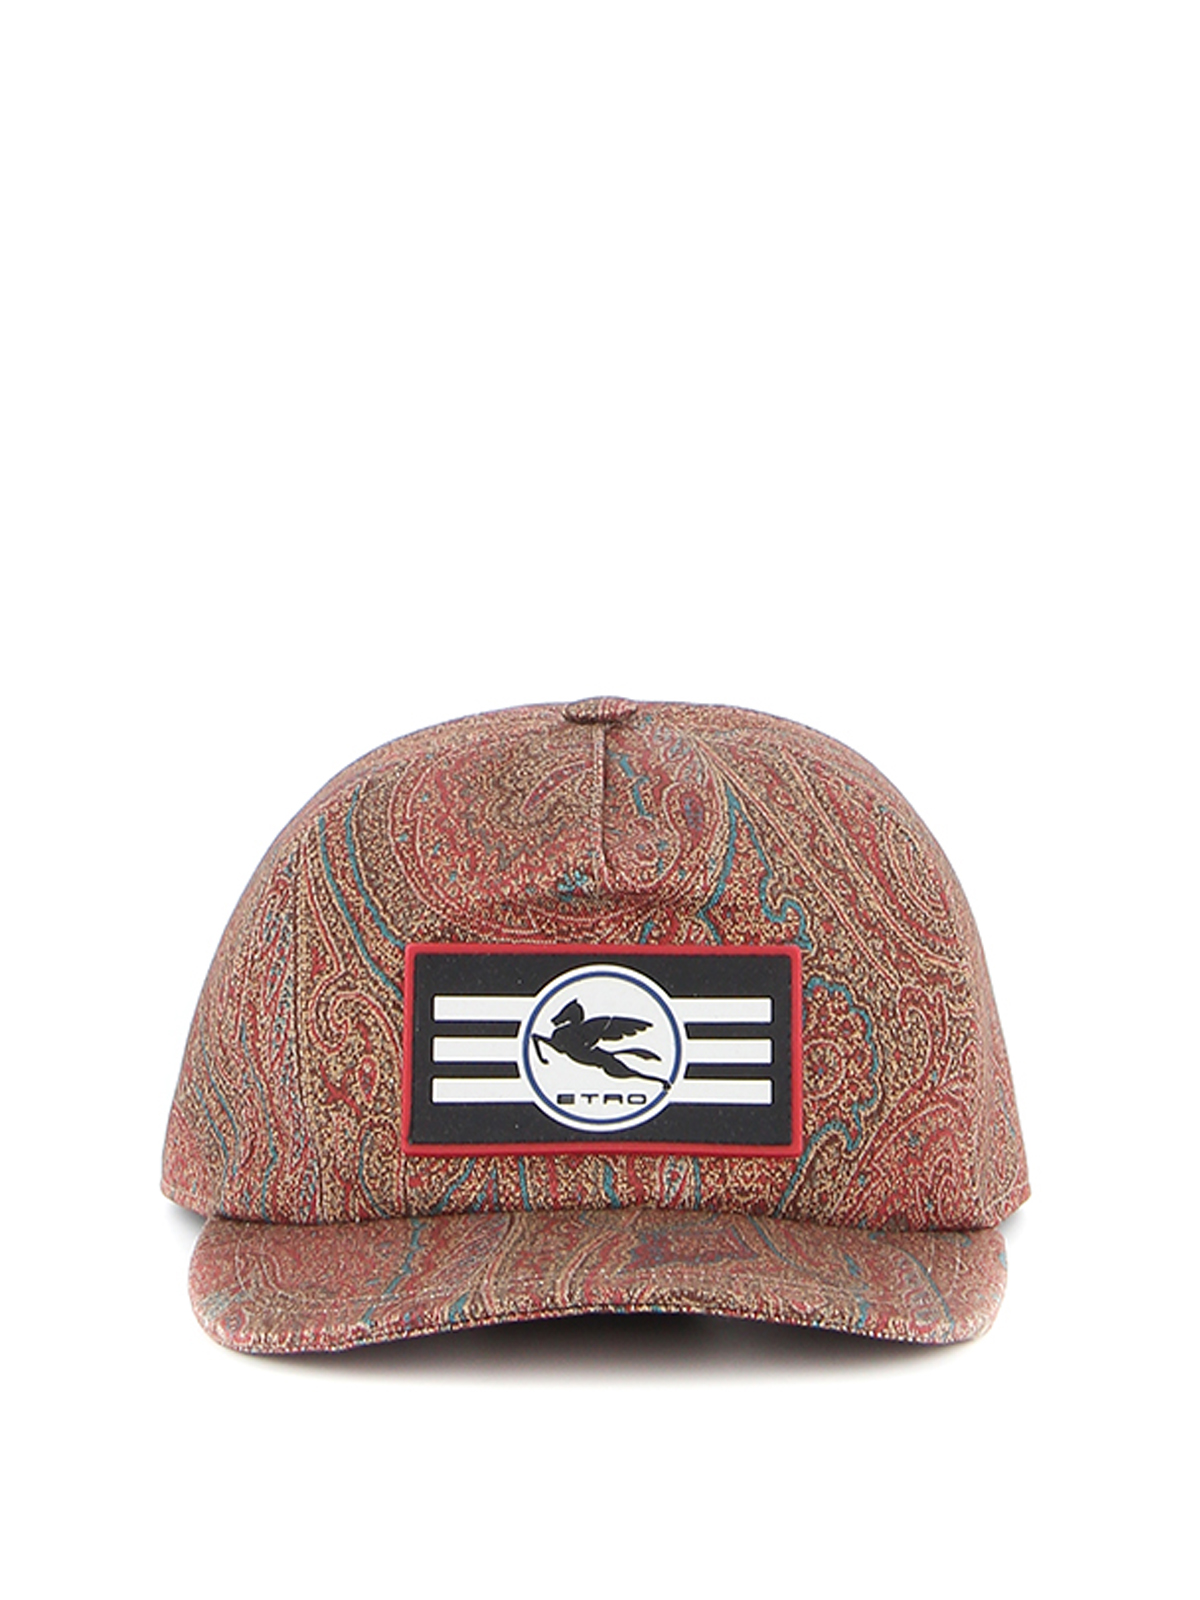 Hats & caps Etro - Paisley baseball cap with rubber logo patch - 1T8345130150